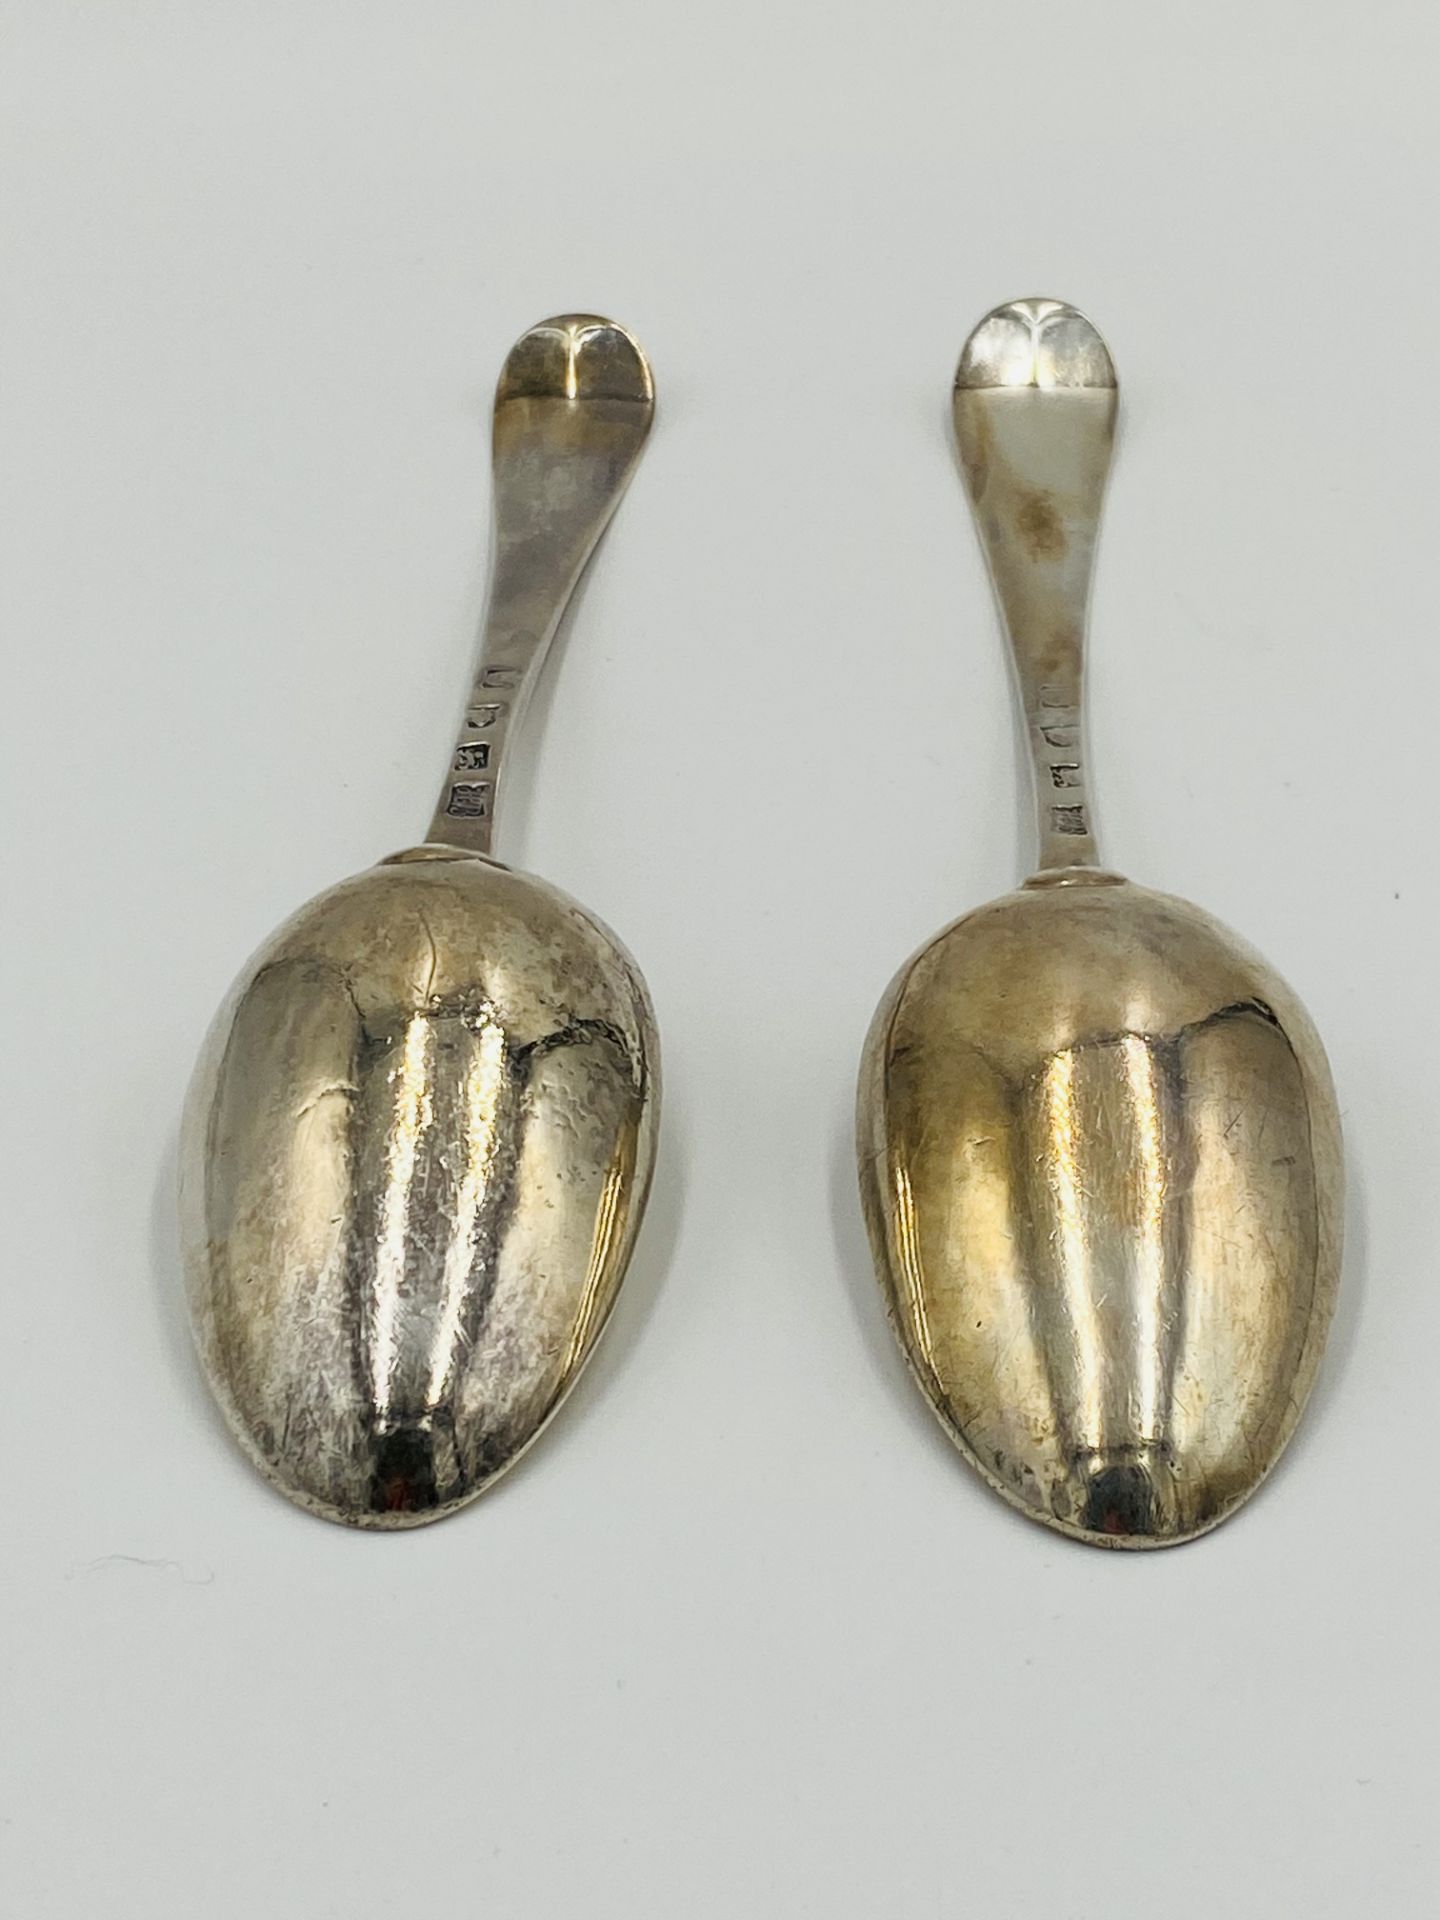 A pair of mid 18th century silver Old English pattern table spoons by Hester Bateman - Image 5 of 6